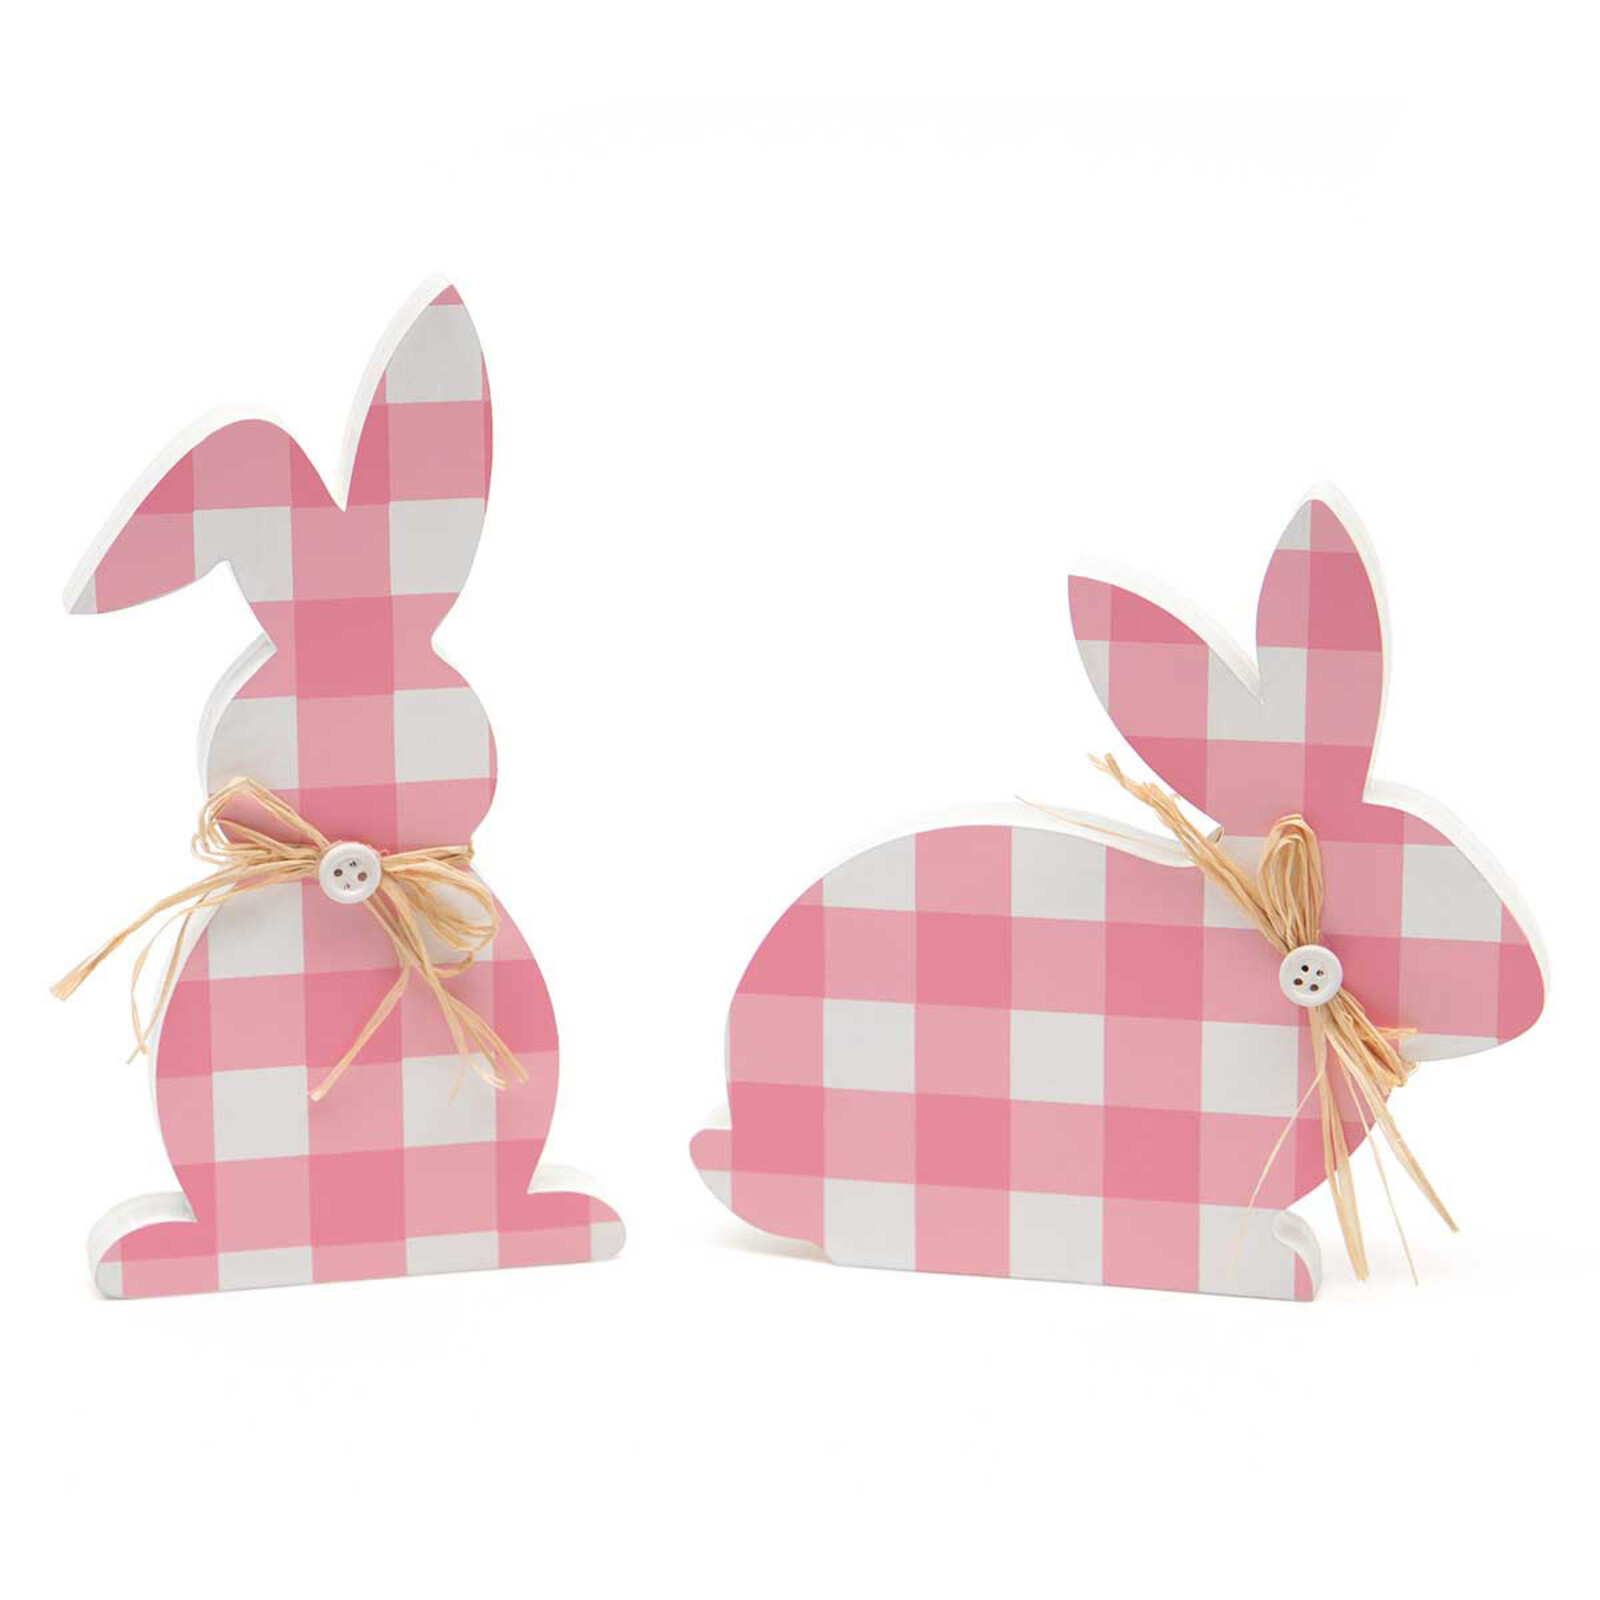 Meravic Bunnies Plaid Wood Sit-A-Bouts Sitting/Standing   T5002 loading=